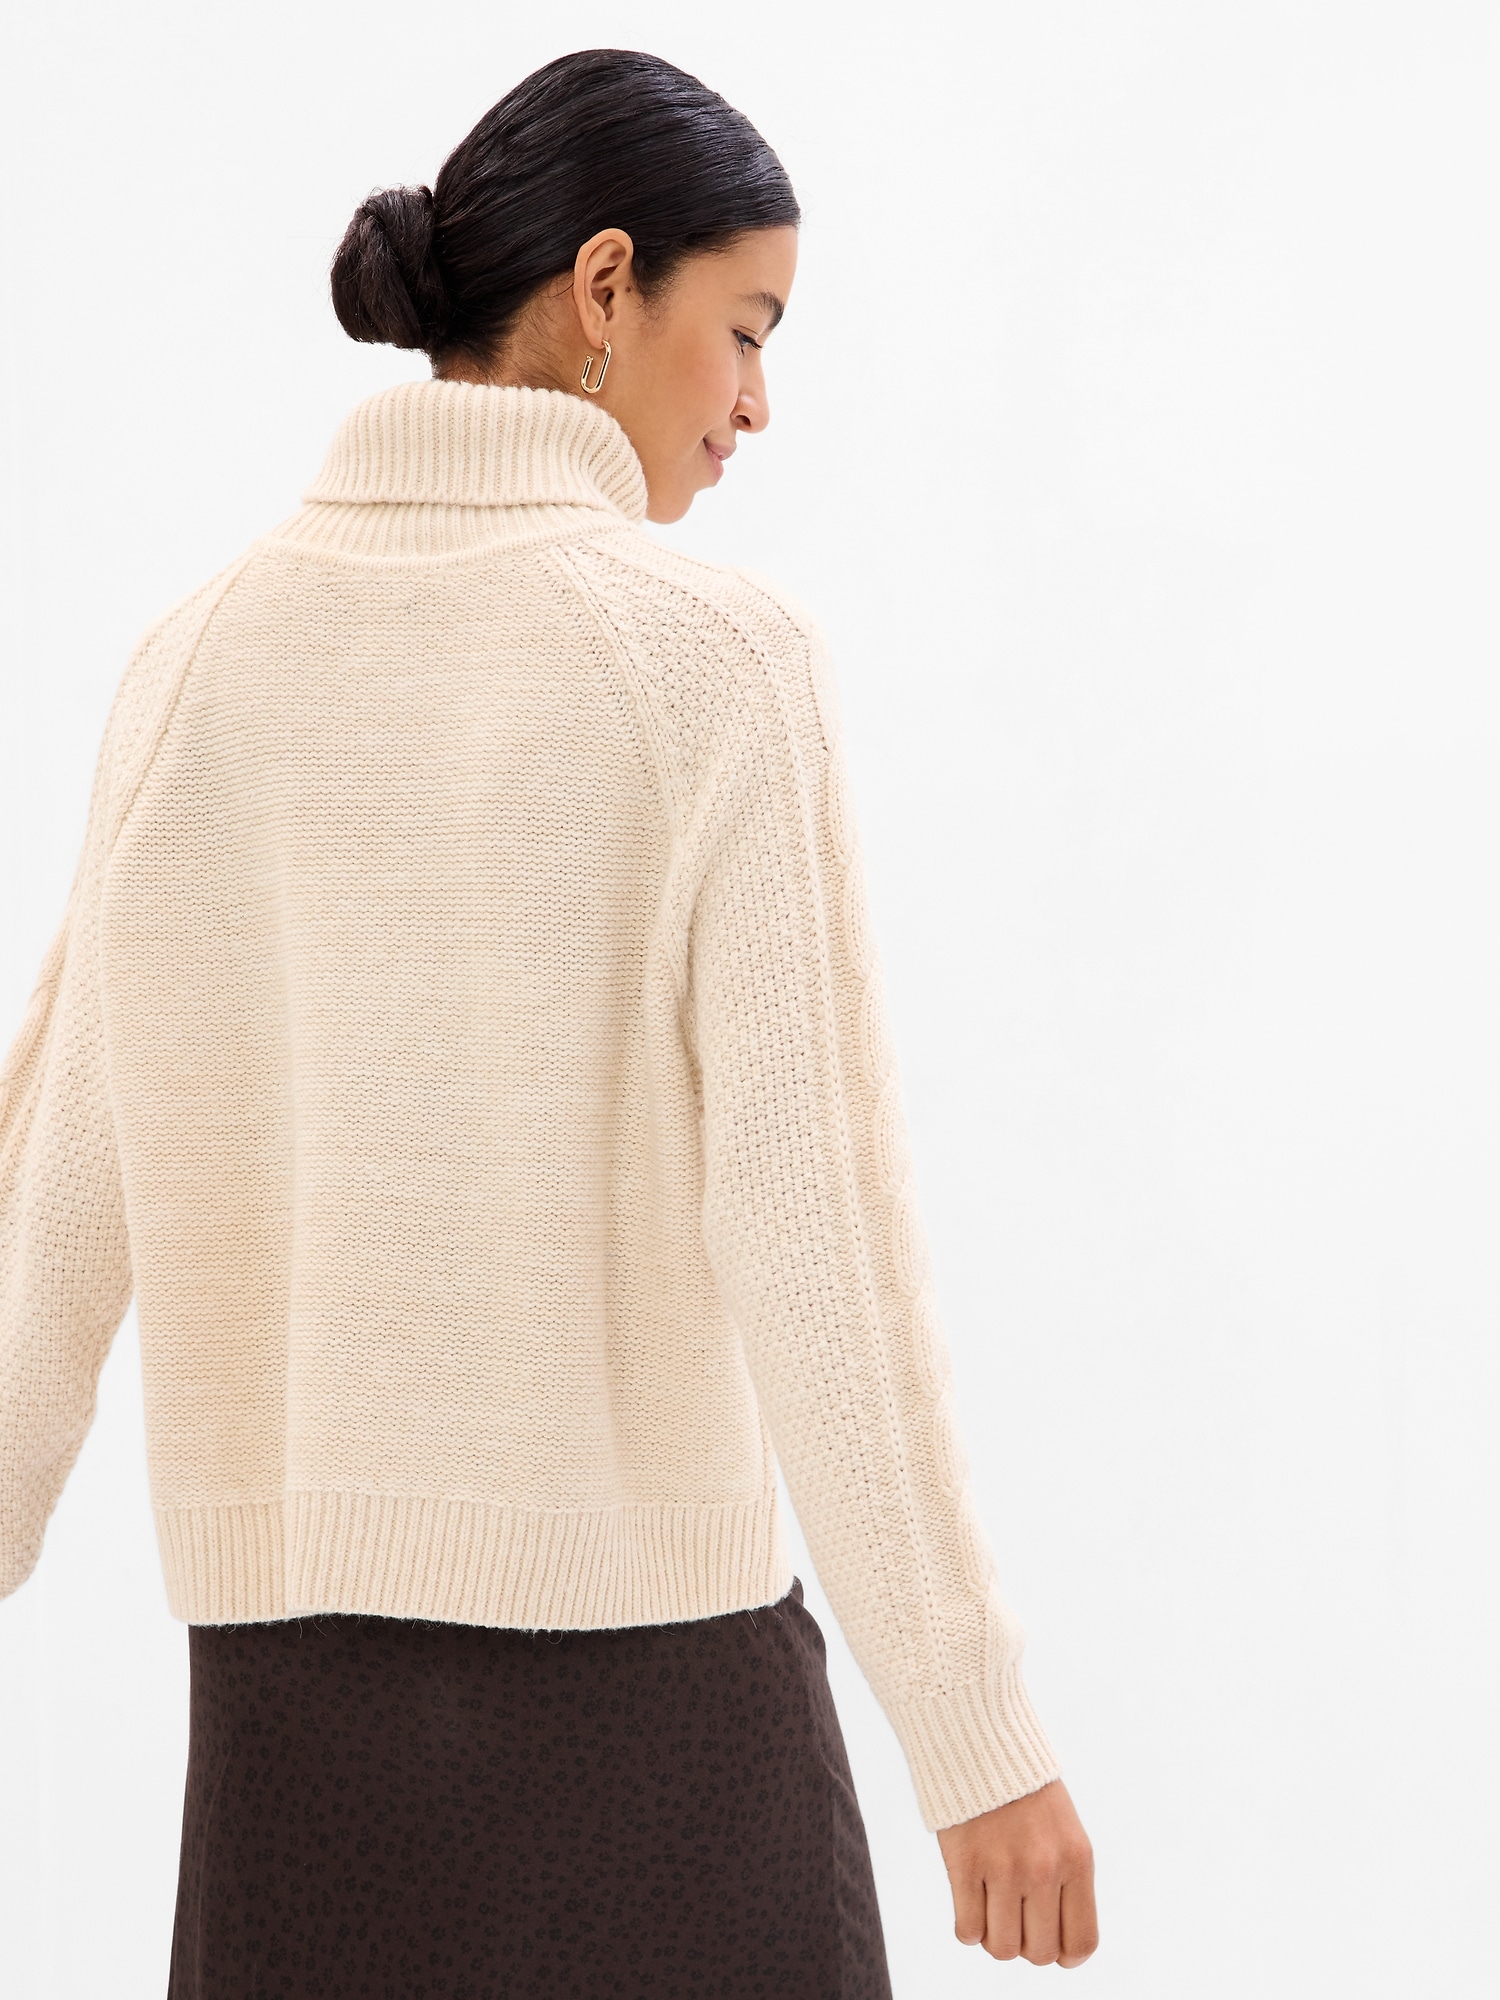 Over-sized Sweater Pullover Camel Polo-neck Alpaca Beige Big Comfy